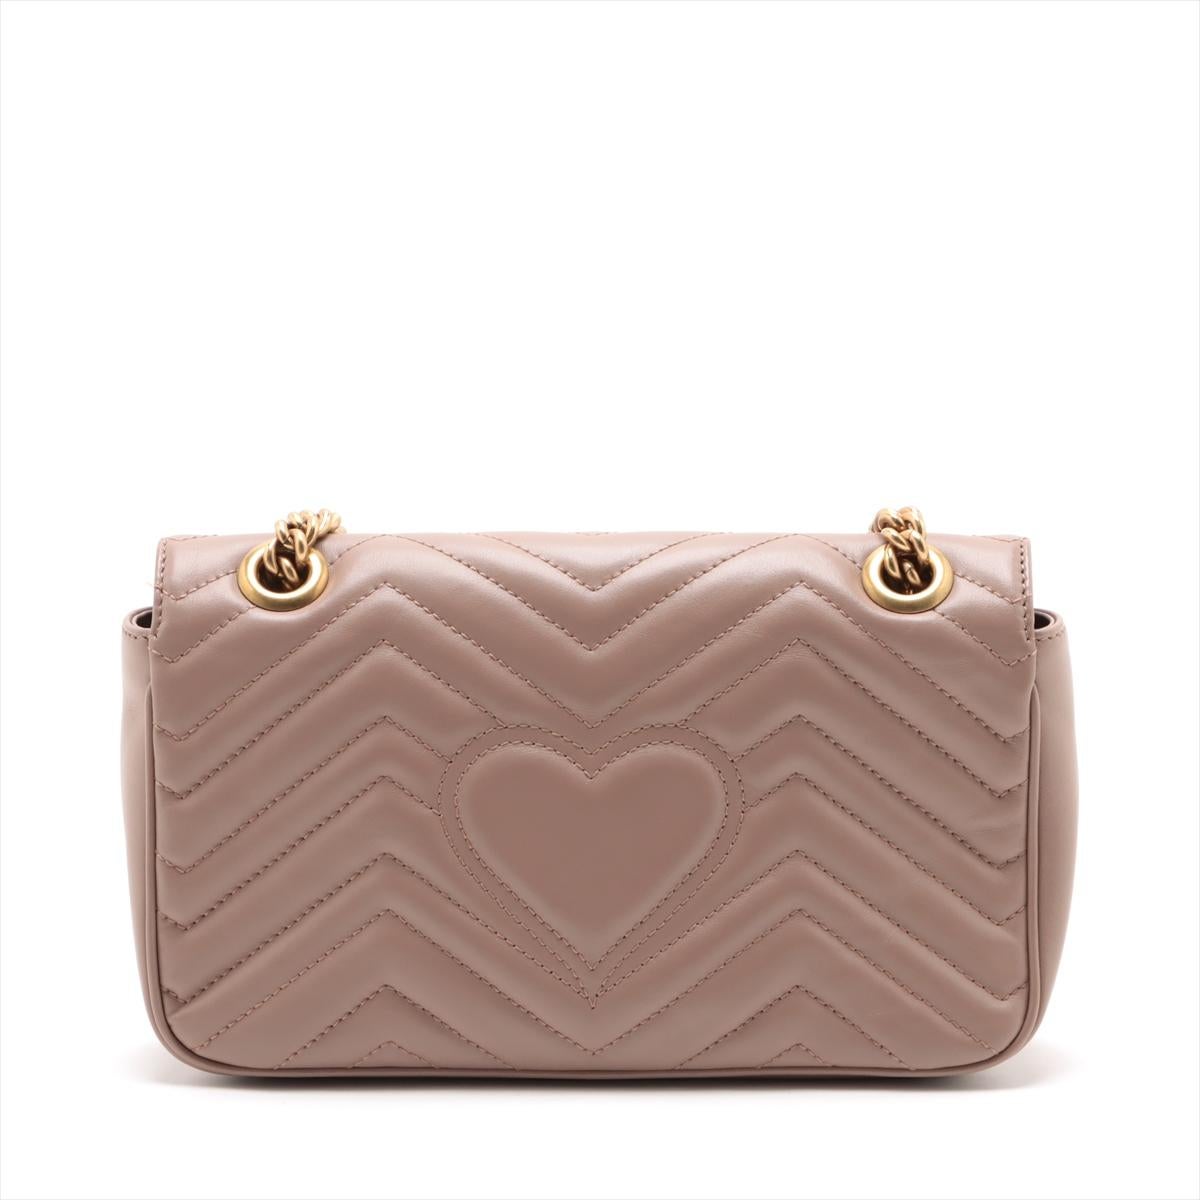 Step into luxury with the Gucci GG Marmont Small Chevron Leather Flap Bag in elegant beige. This exquisitely crafted bag is presented in excellent condition, showcasing the iconic chevron leather that radiates timeless sophistication. Perfect for